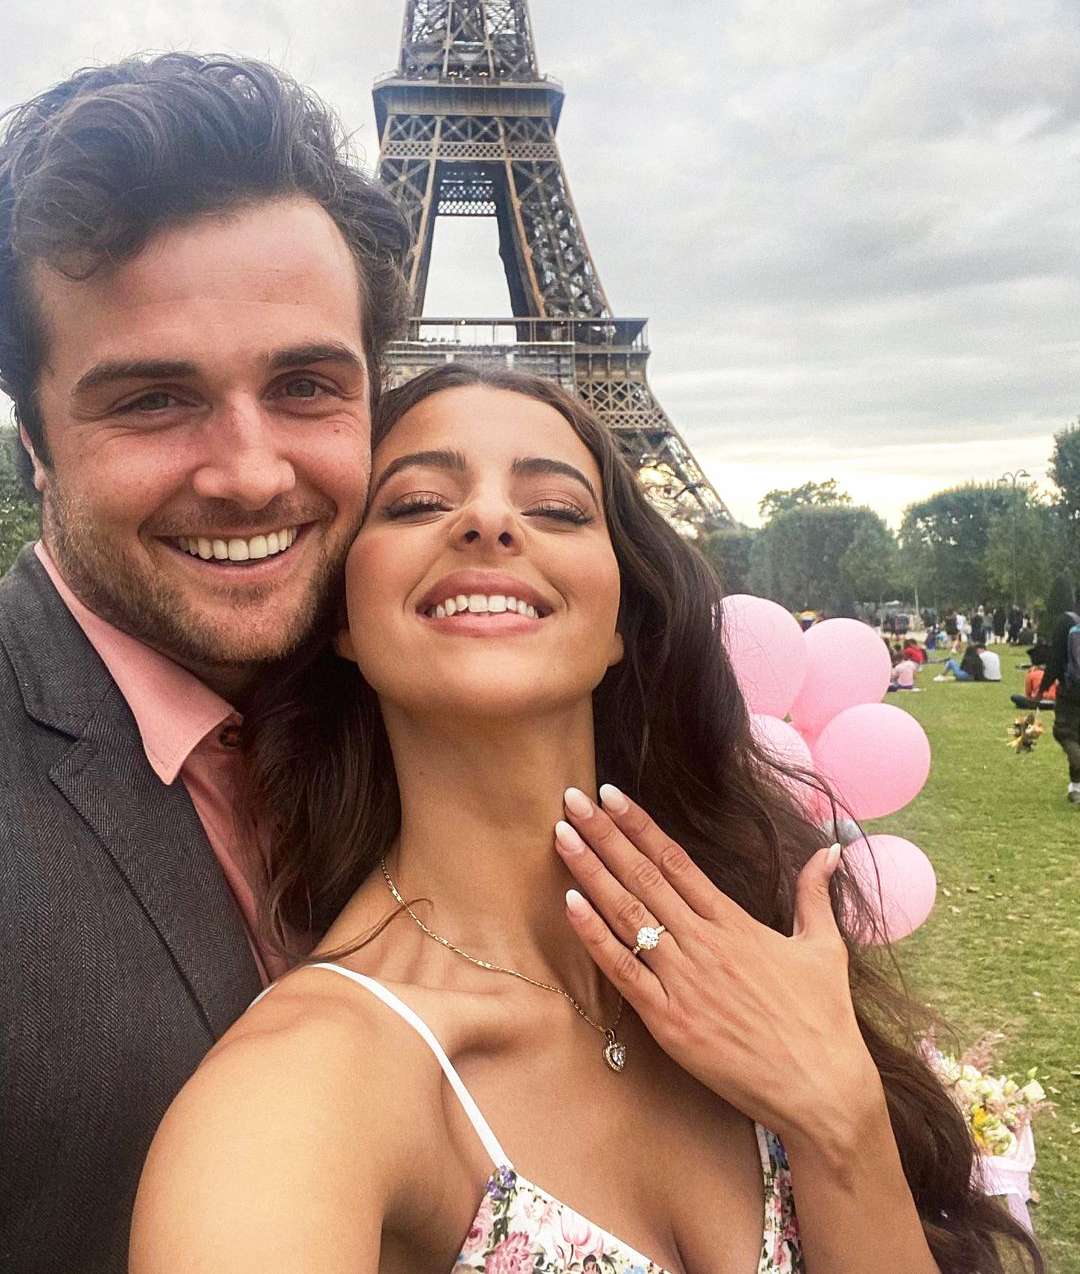 Beau Mirchoff Proposes to Girlfriend Jenny Meinen in Paris: 'The Love of My Life Said Oui'